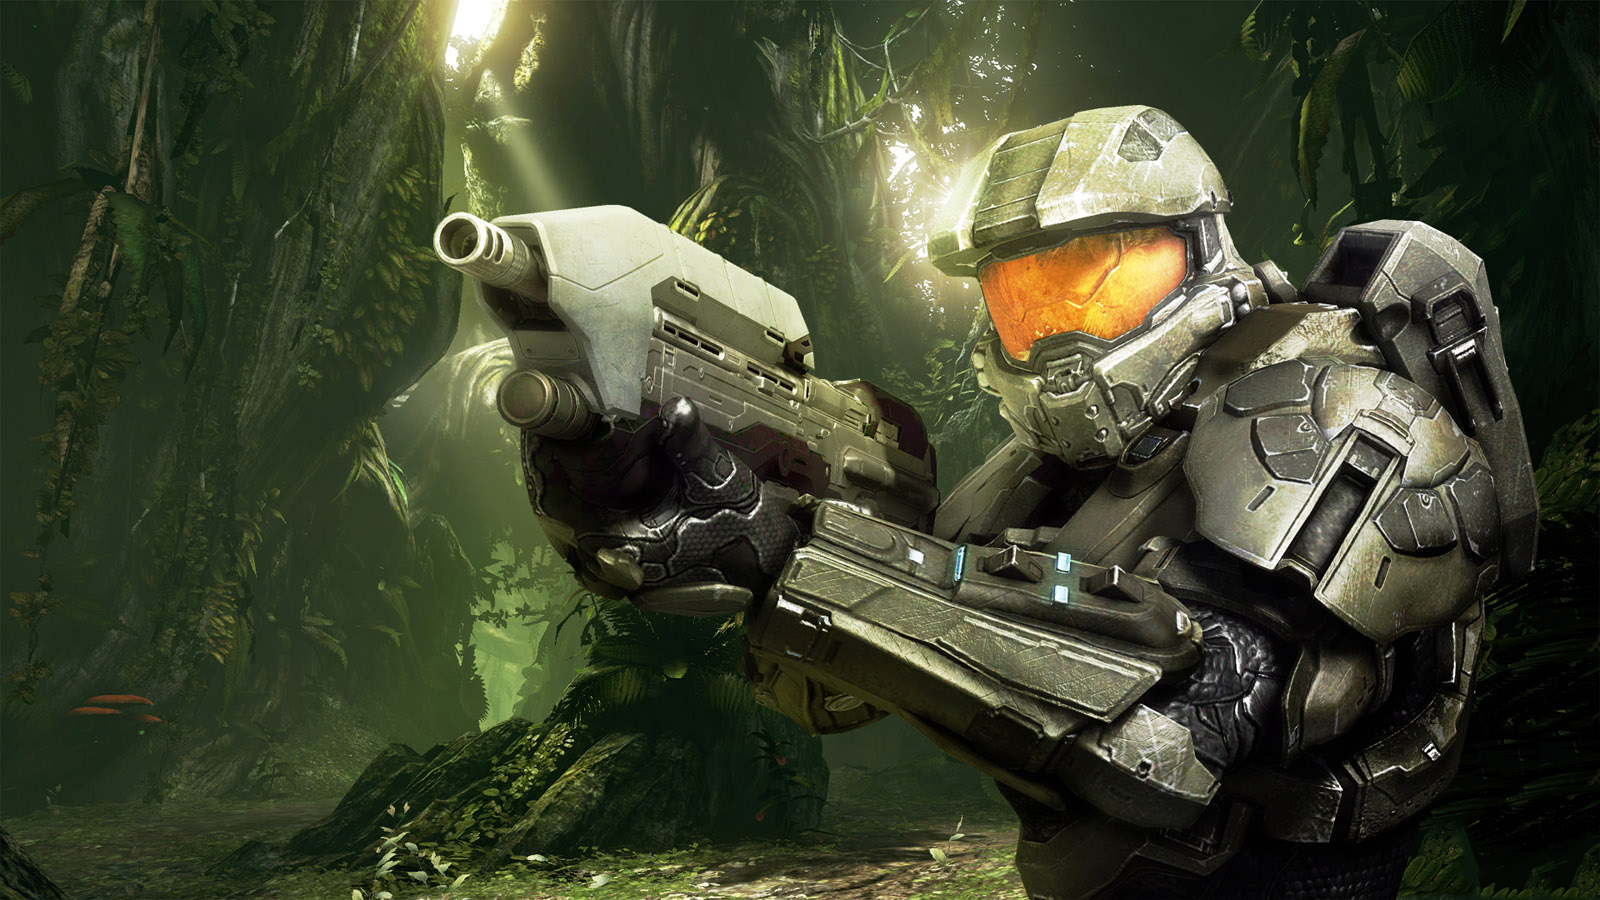 Awesome Master Chief Halo Wallpaper Full HD